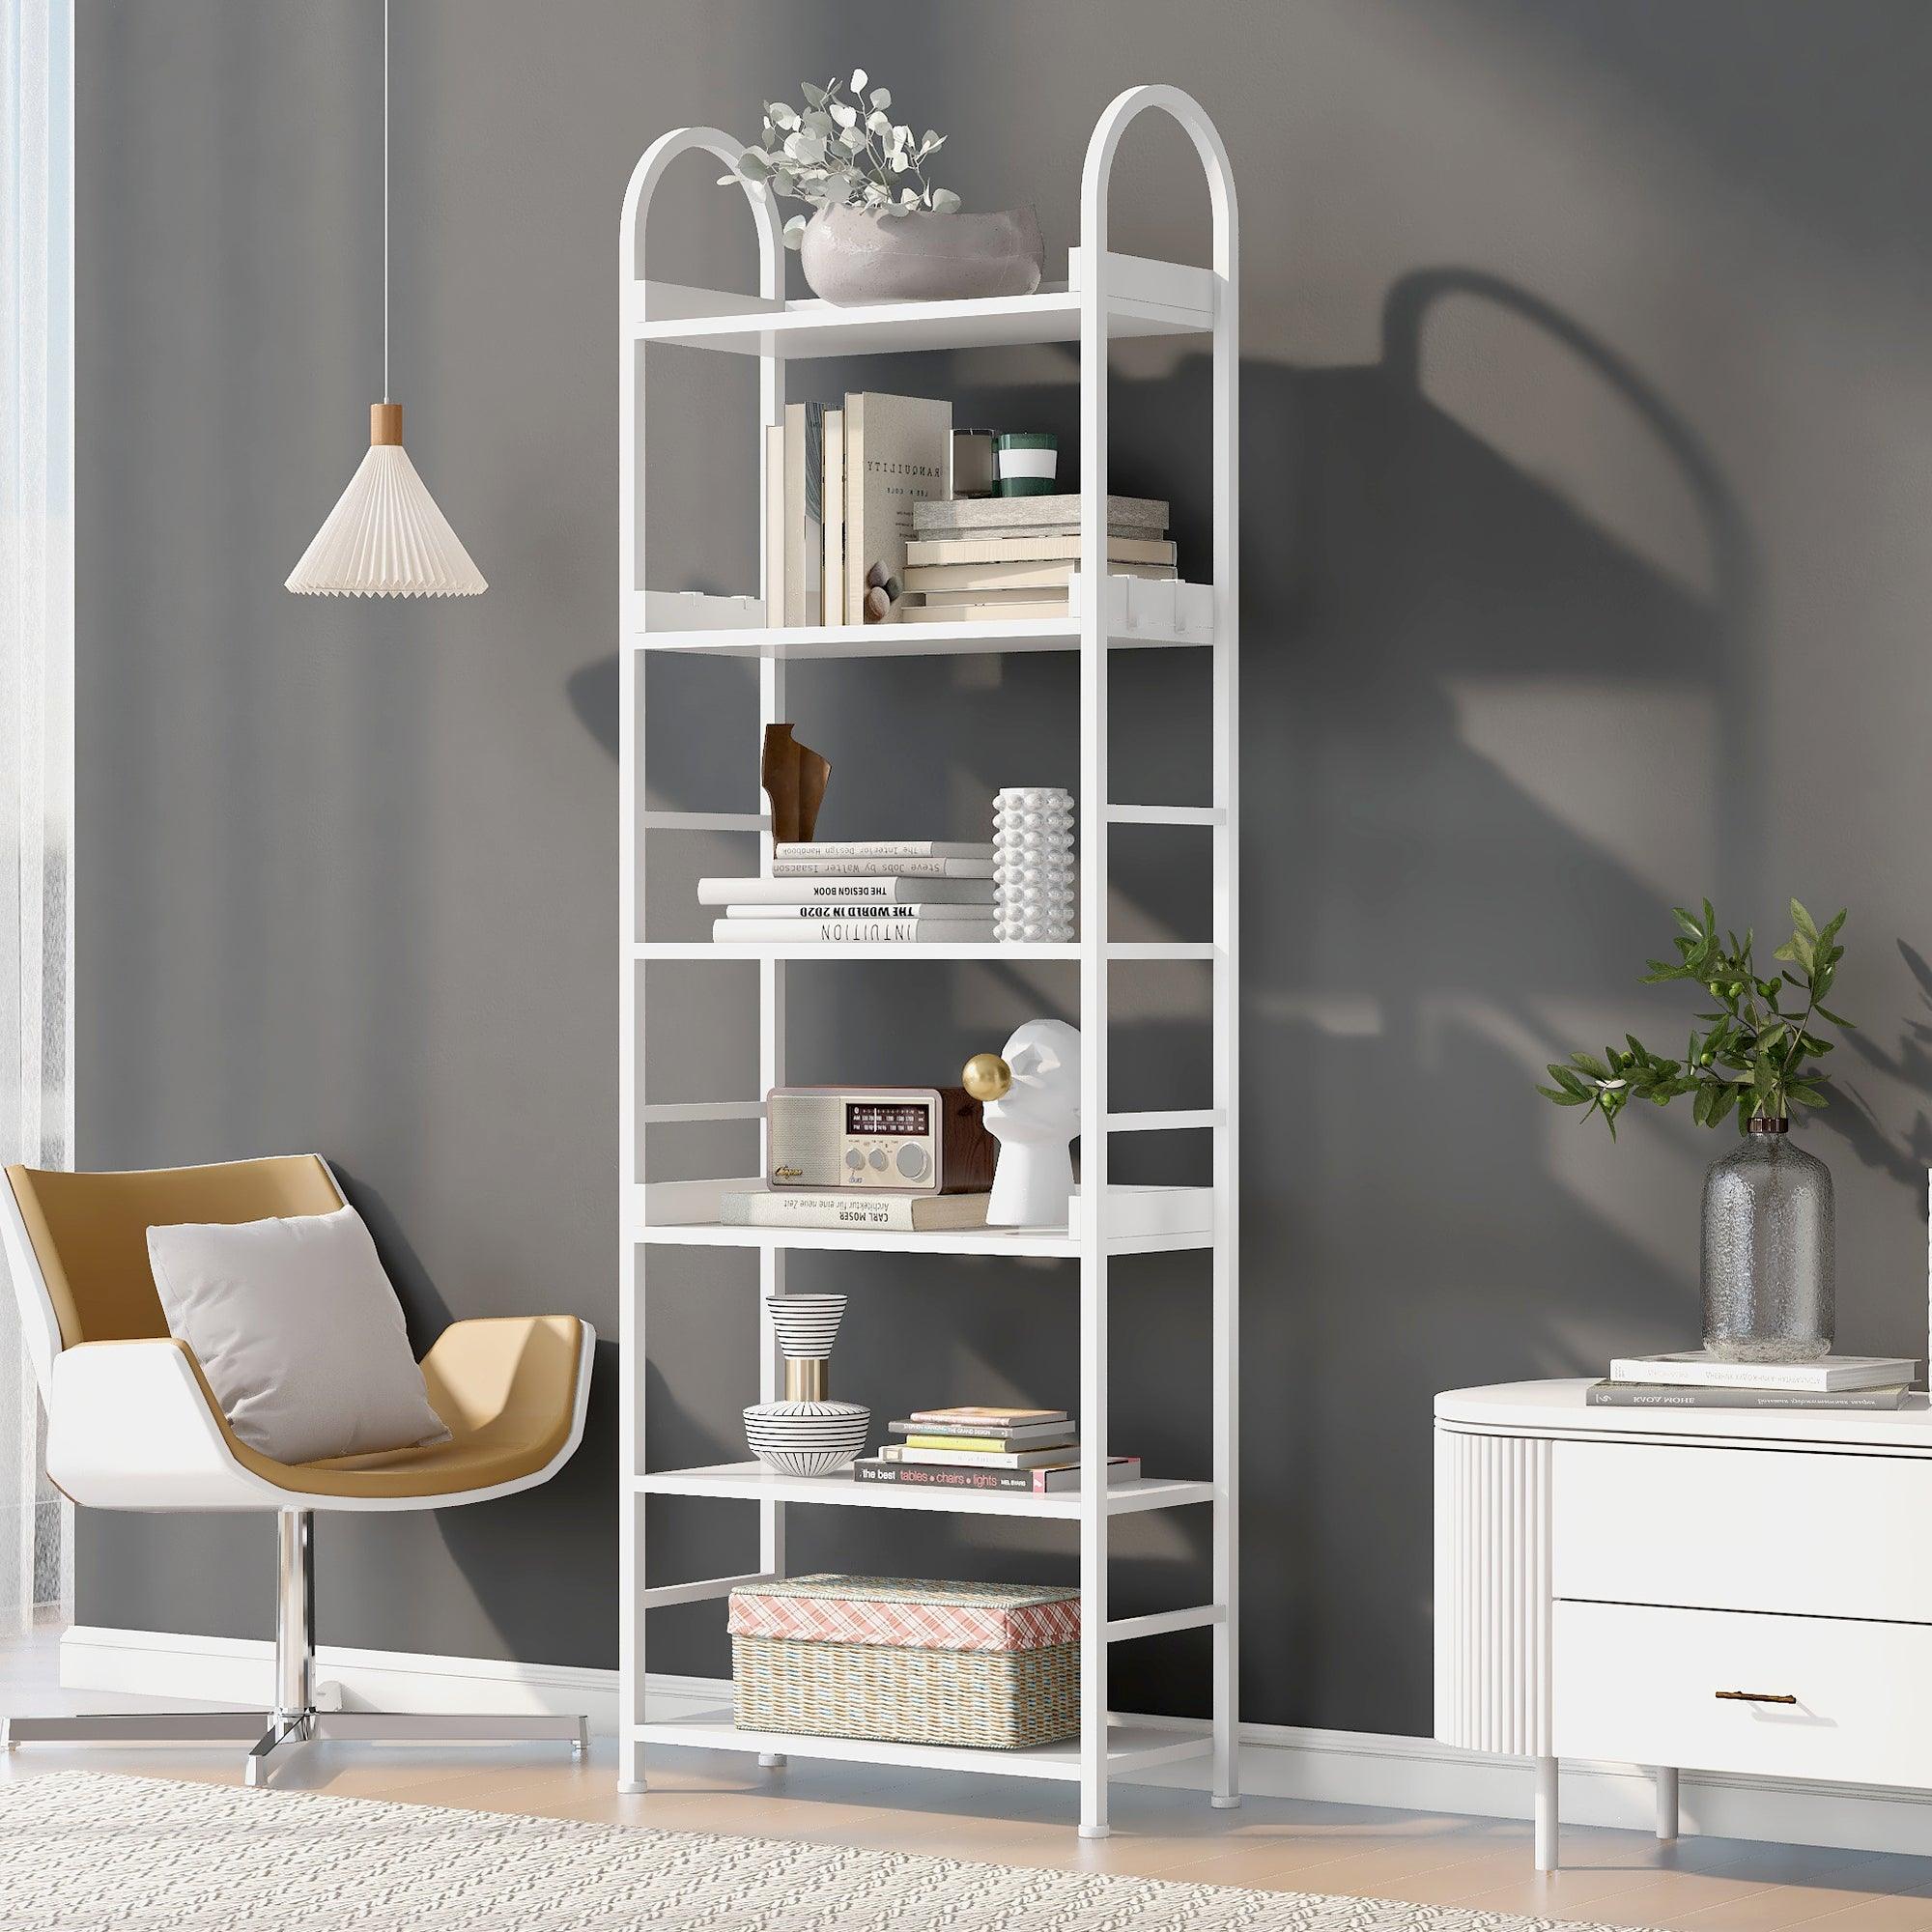 70.8 Inch Tall Bookshelf, 6-Tier Shelves With Round Top Frame, MDF Boards, Adjustable Foot Pads, White LamCham